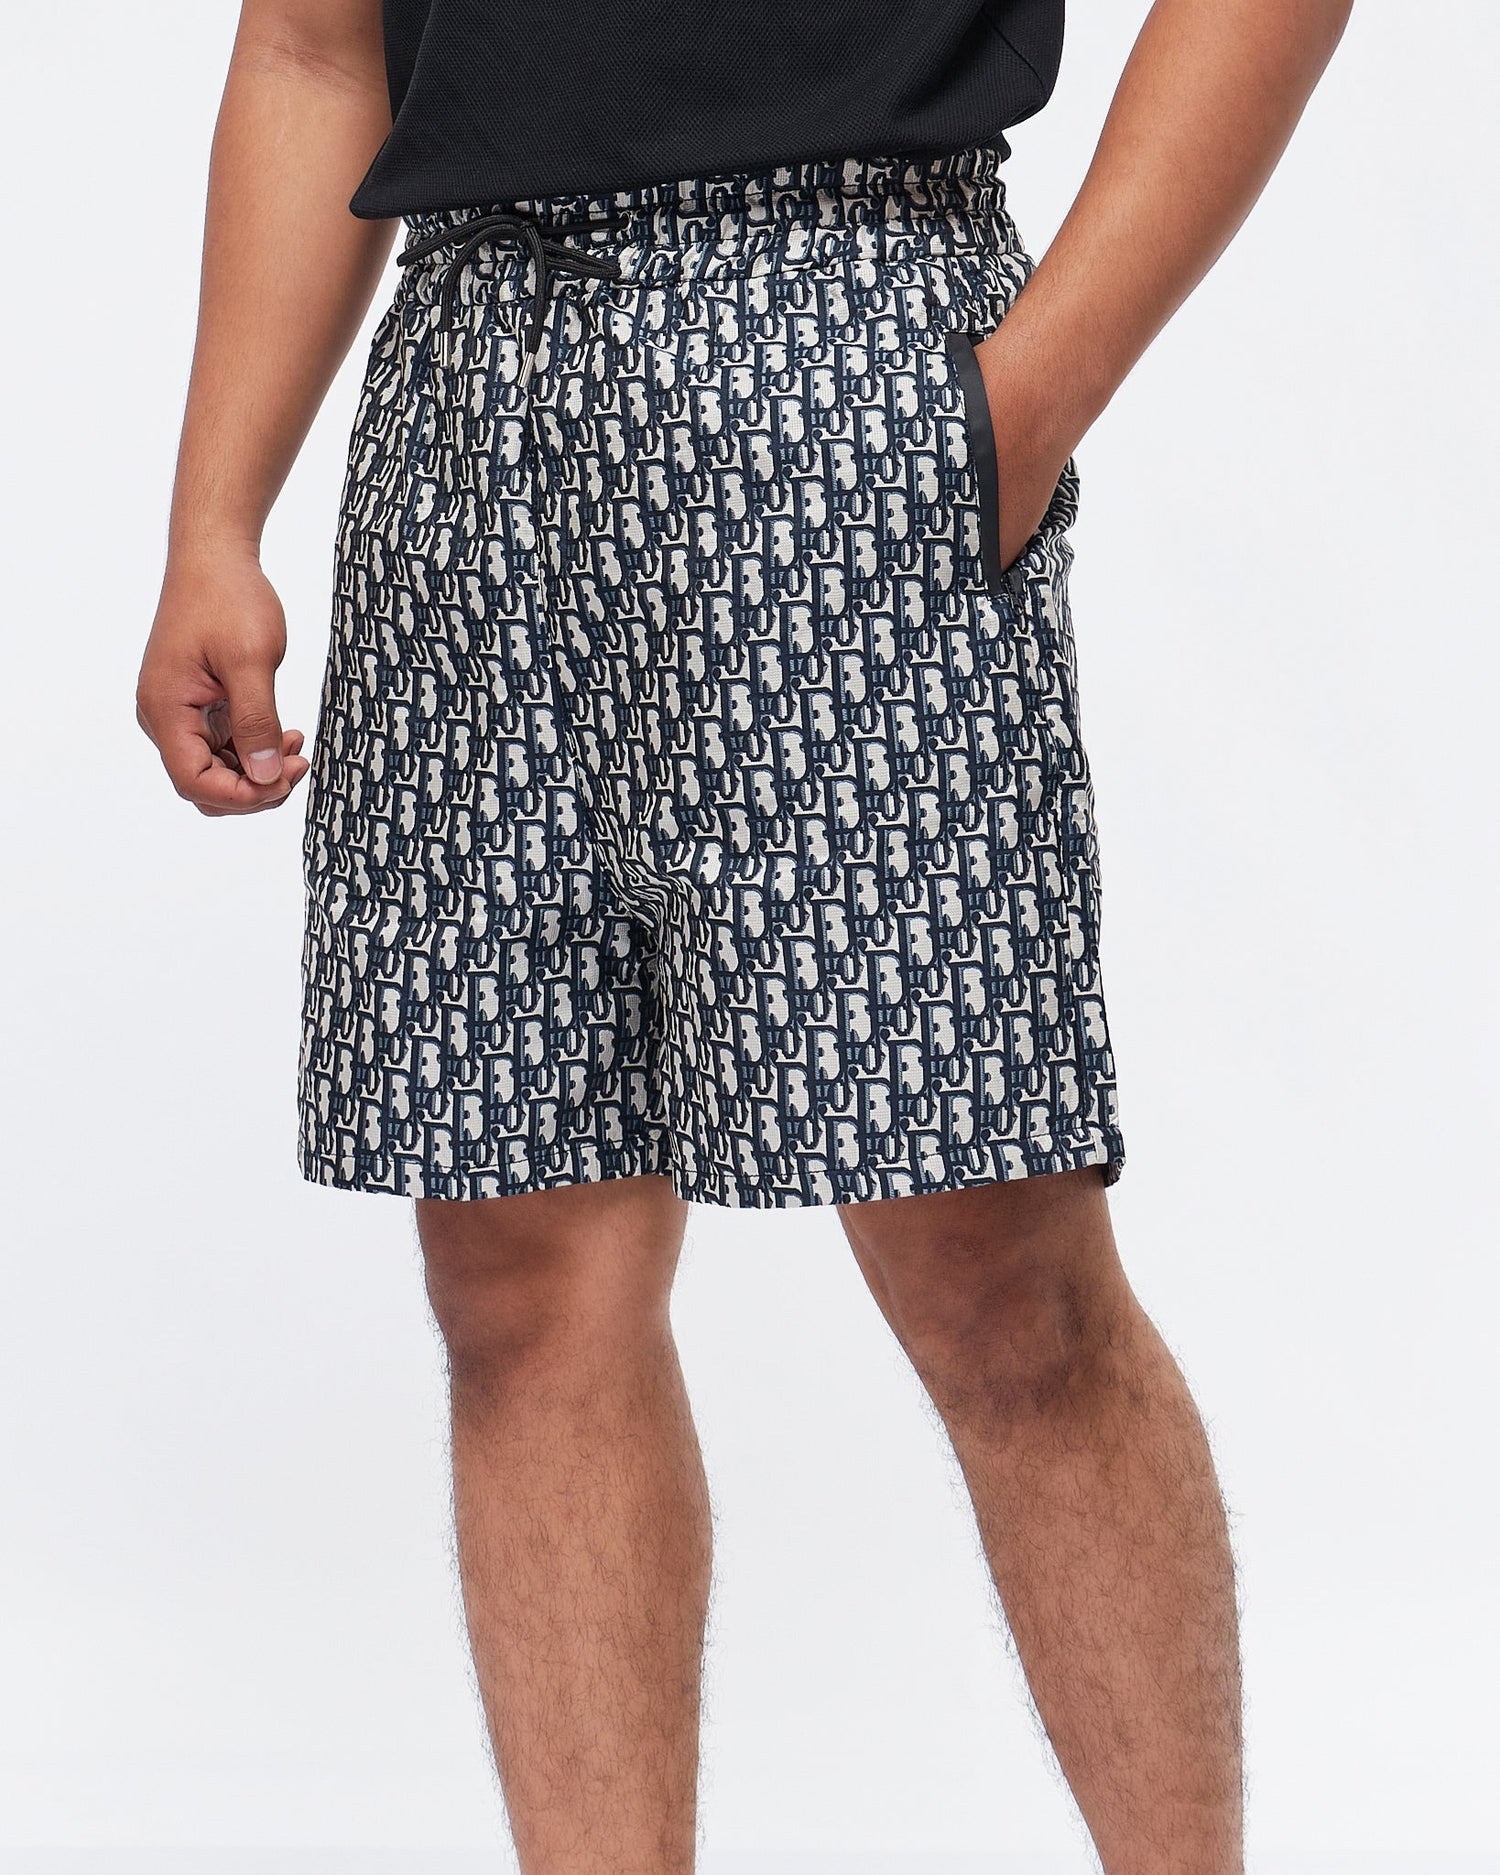 MOI OUTFIT-CD Monogrsm Over Printed Men Shorts 22.90